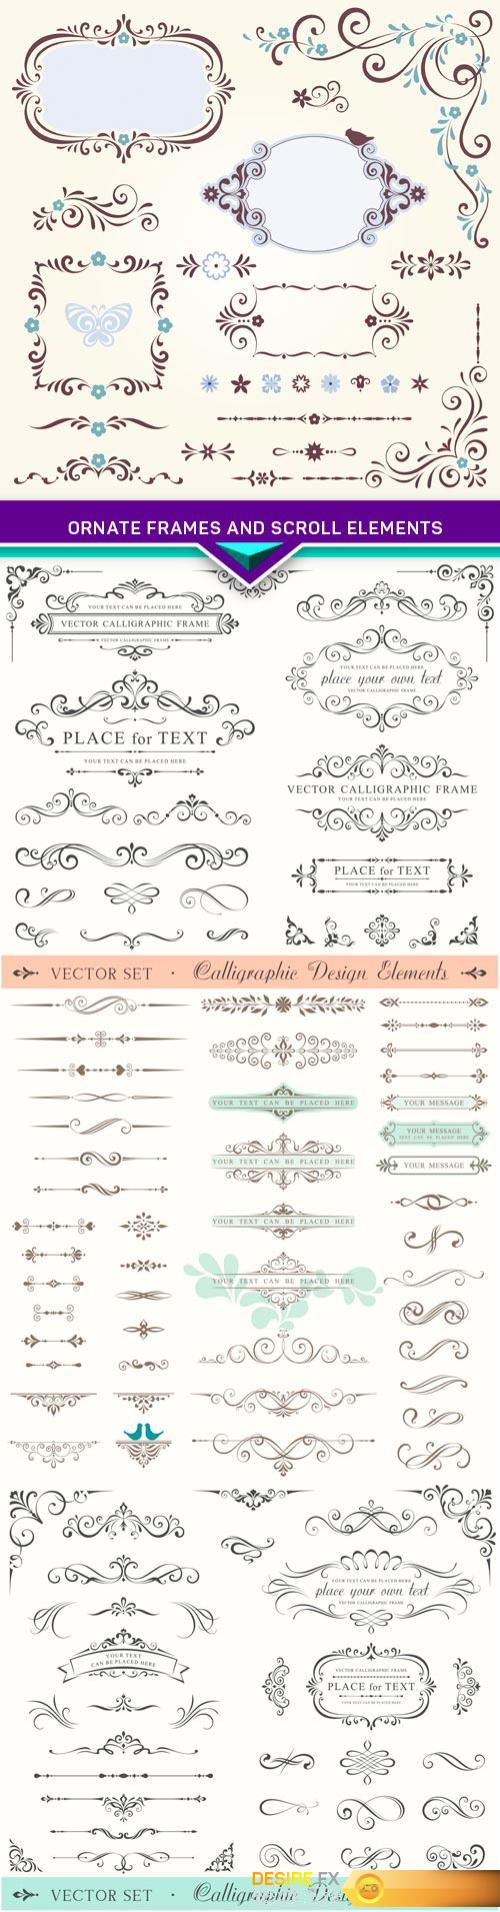 Ornate Frames and Scroll Elements 4X EPS